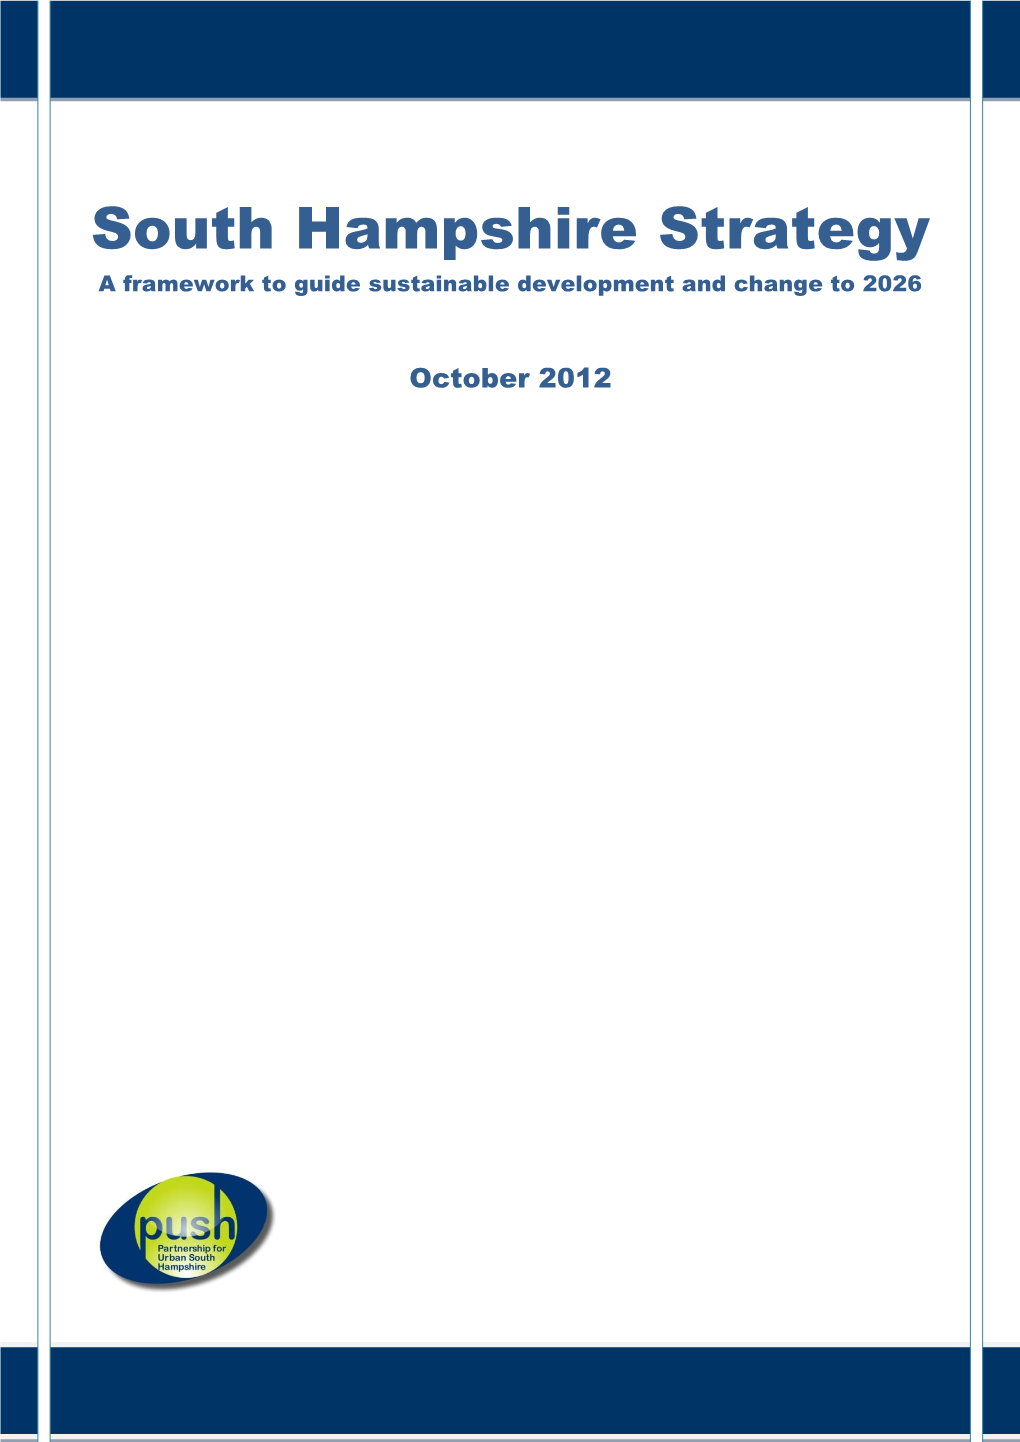 South Hampshire Strategy a Framework to Guide Sustainable Development and Change to 2026